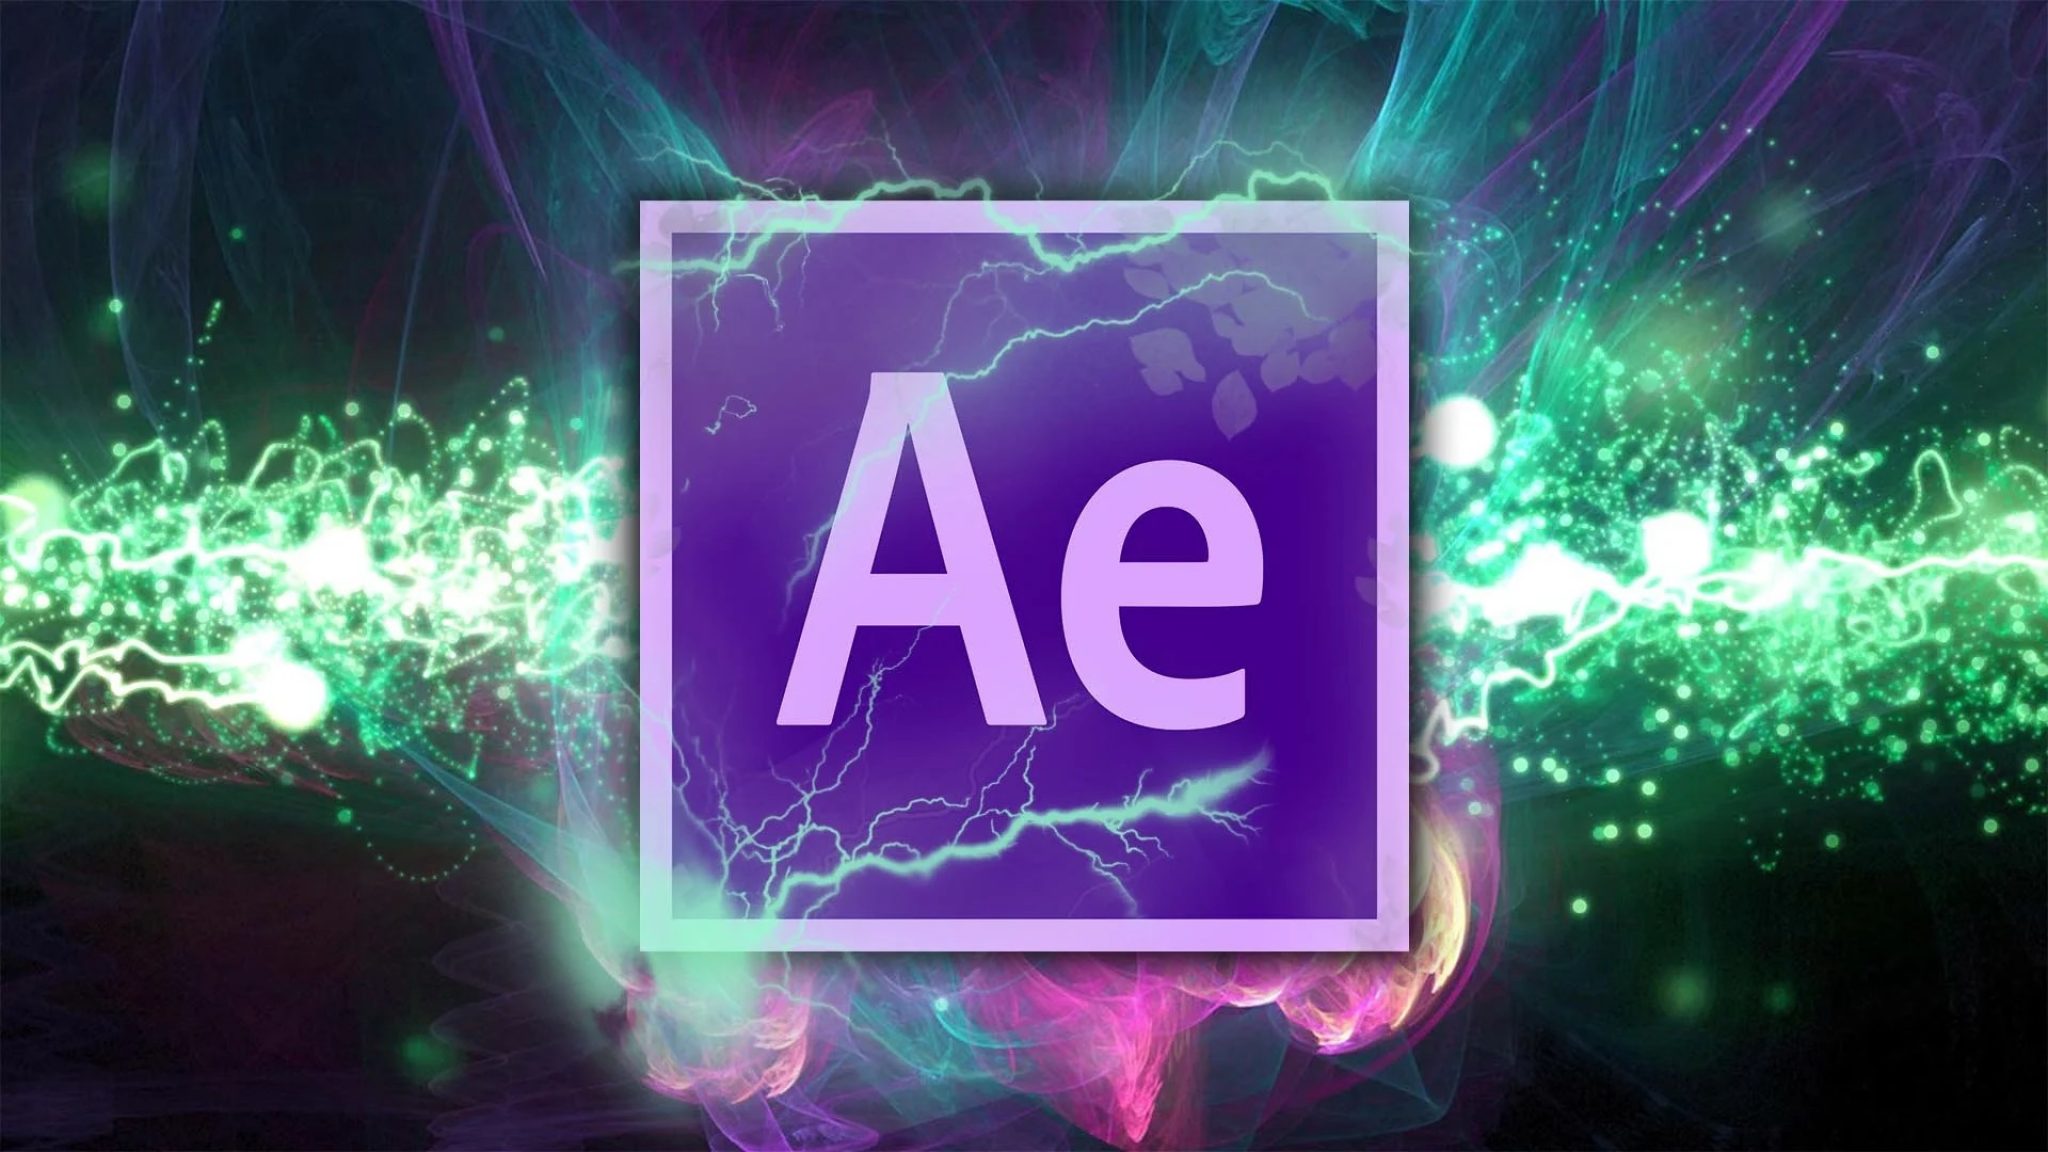 After effects работа. After Effects. Adobe after Effects. Adobe after Effects cc. Адоб Афтер эффект.